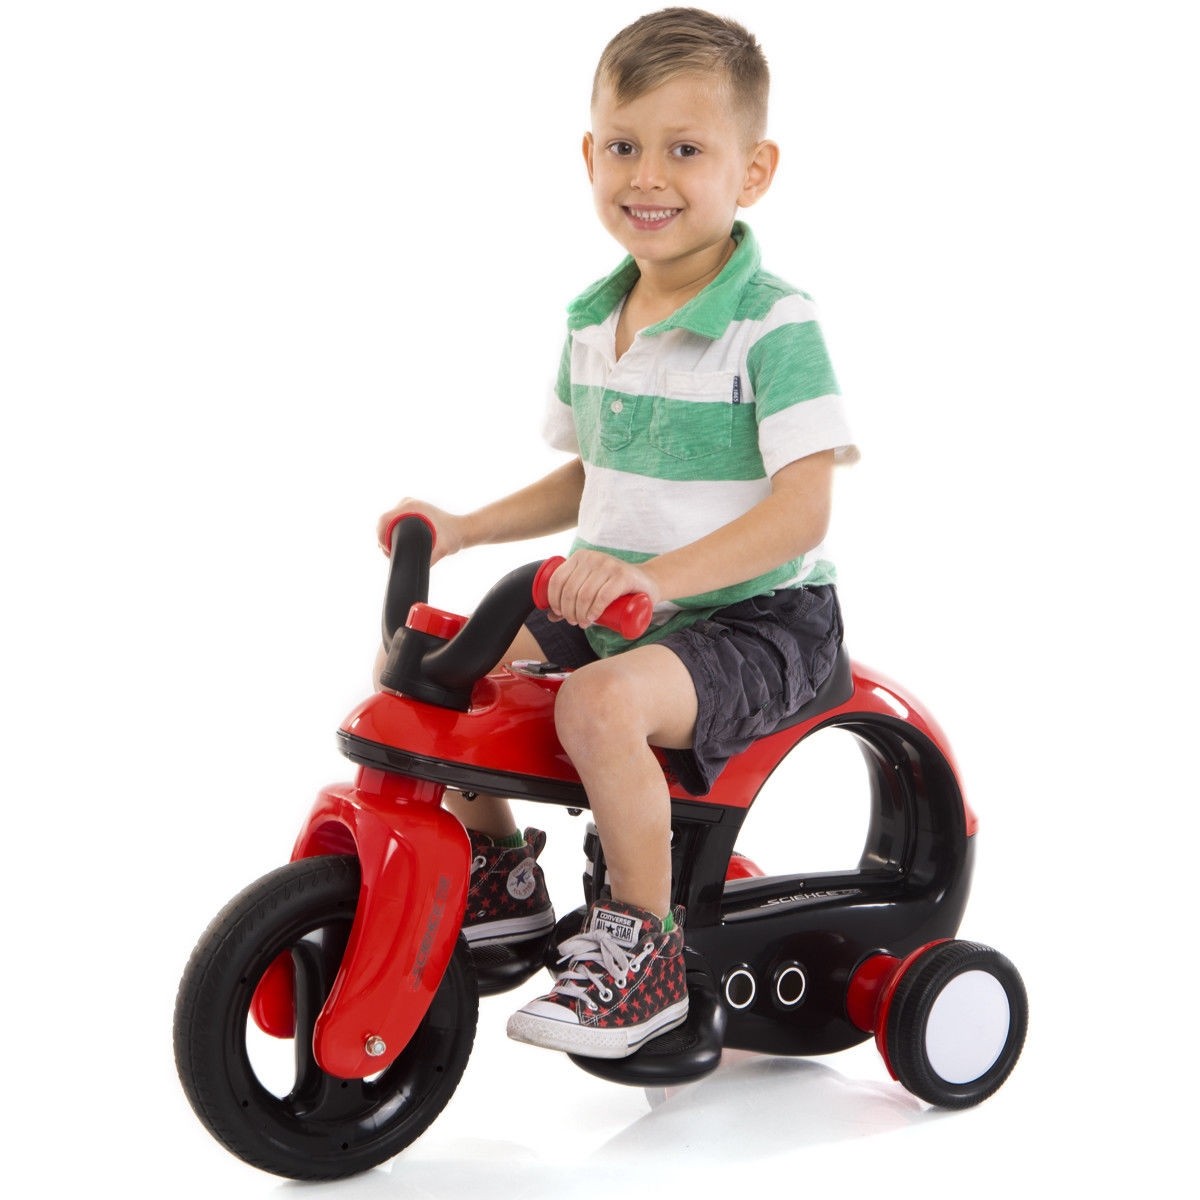 6 V Battery Powered Kids Riding Motorcycle Trike With 3 Wheels